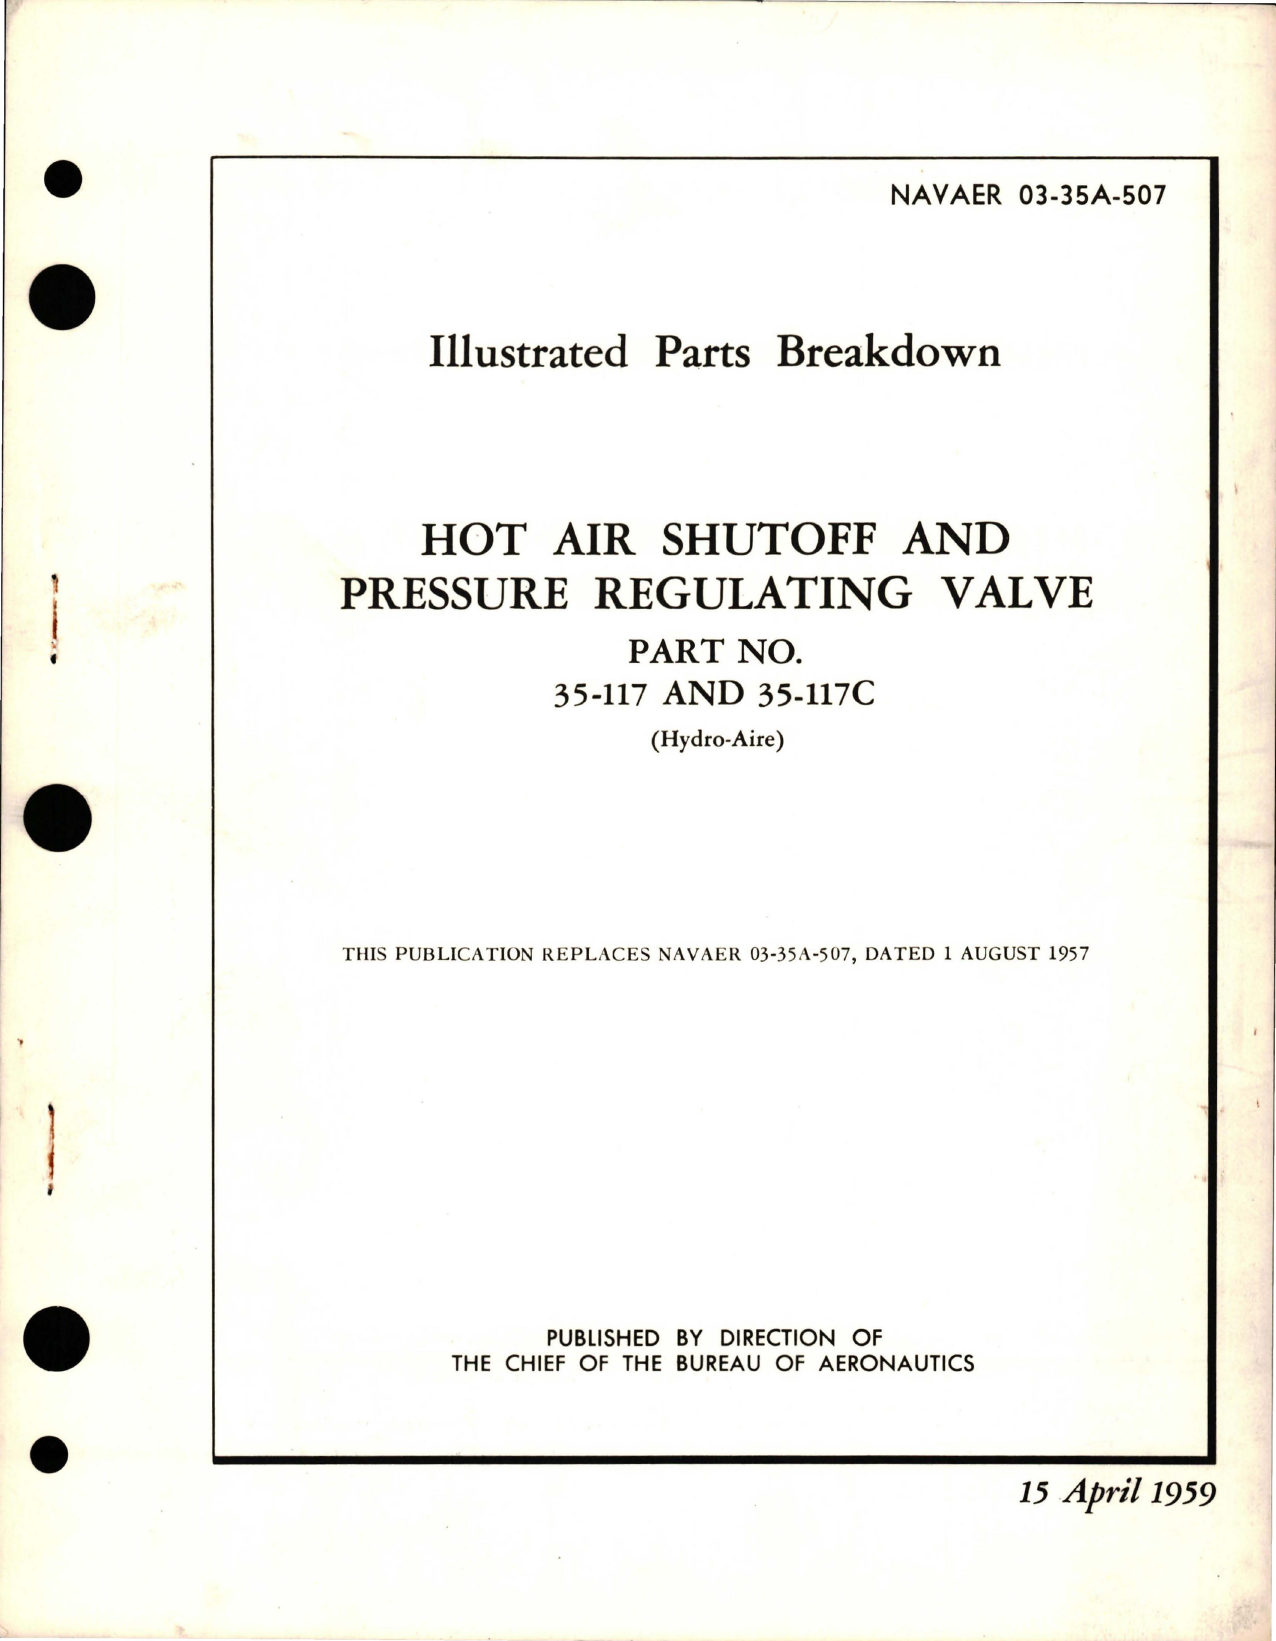 Sample page 1 from AirCorps Library document: Illustrated Parts Breakdown for Hot Air Shutoff and Pressure Regulating Valve - Parts 35-35A-507